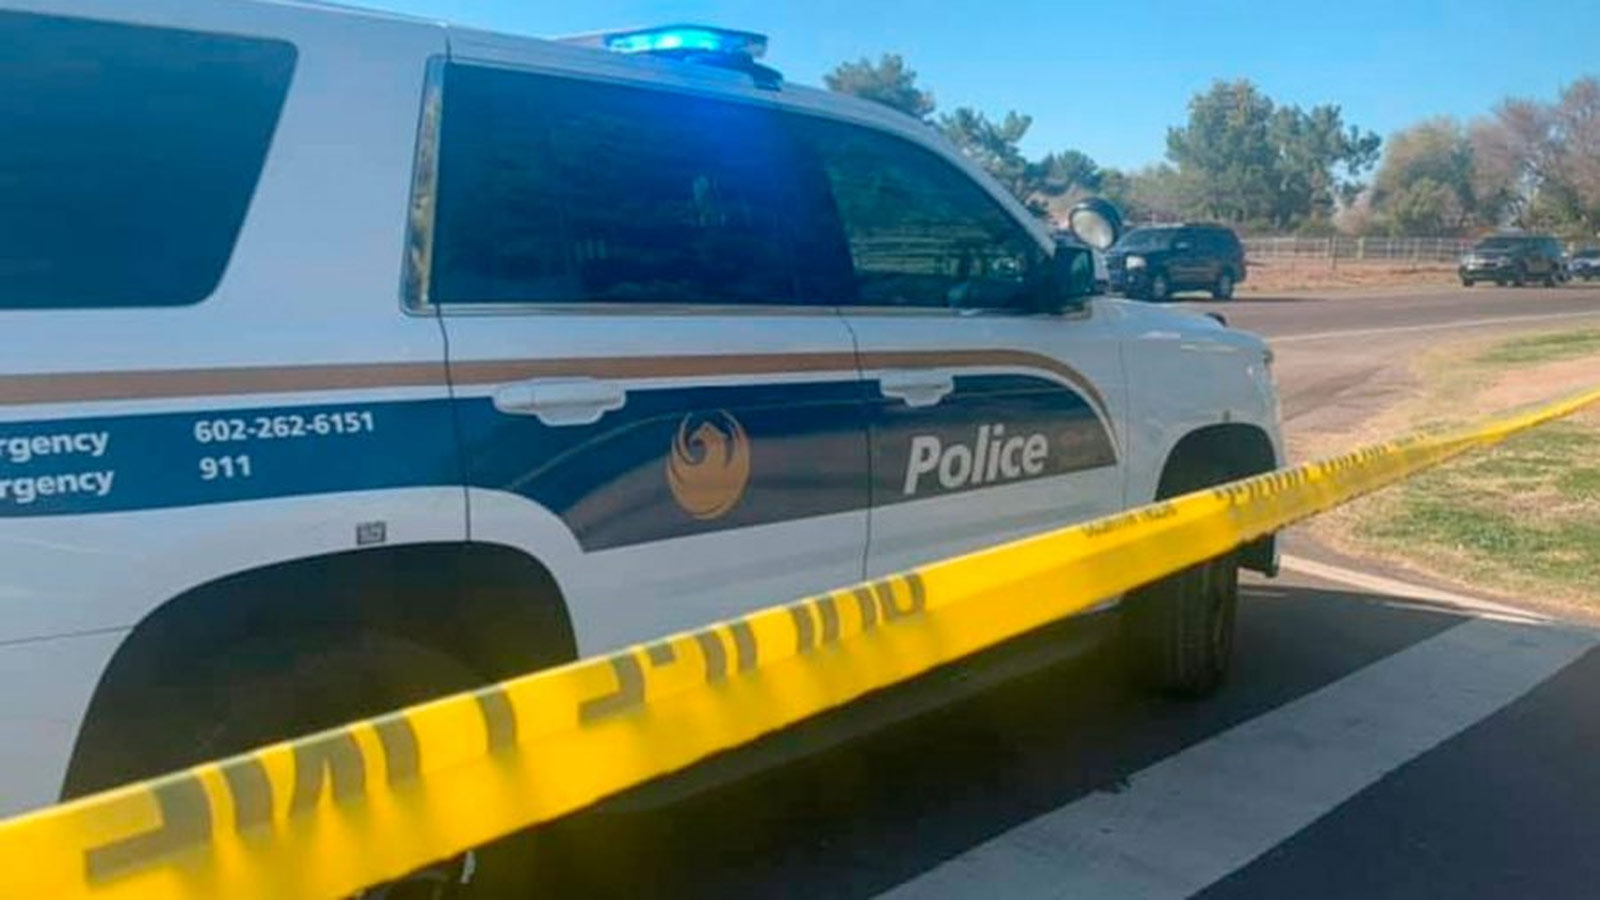 File photo of a Phoenix Police SUV parked next to yellow crime scene tape. Police responded to rPol...